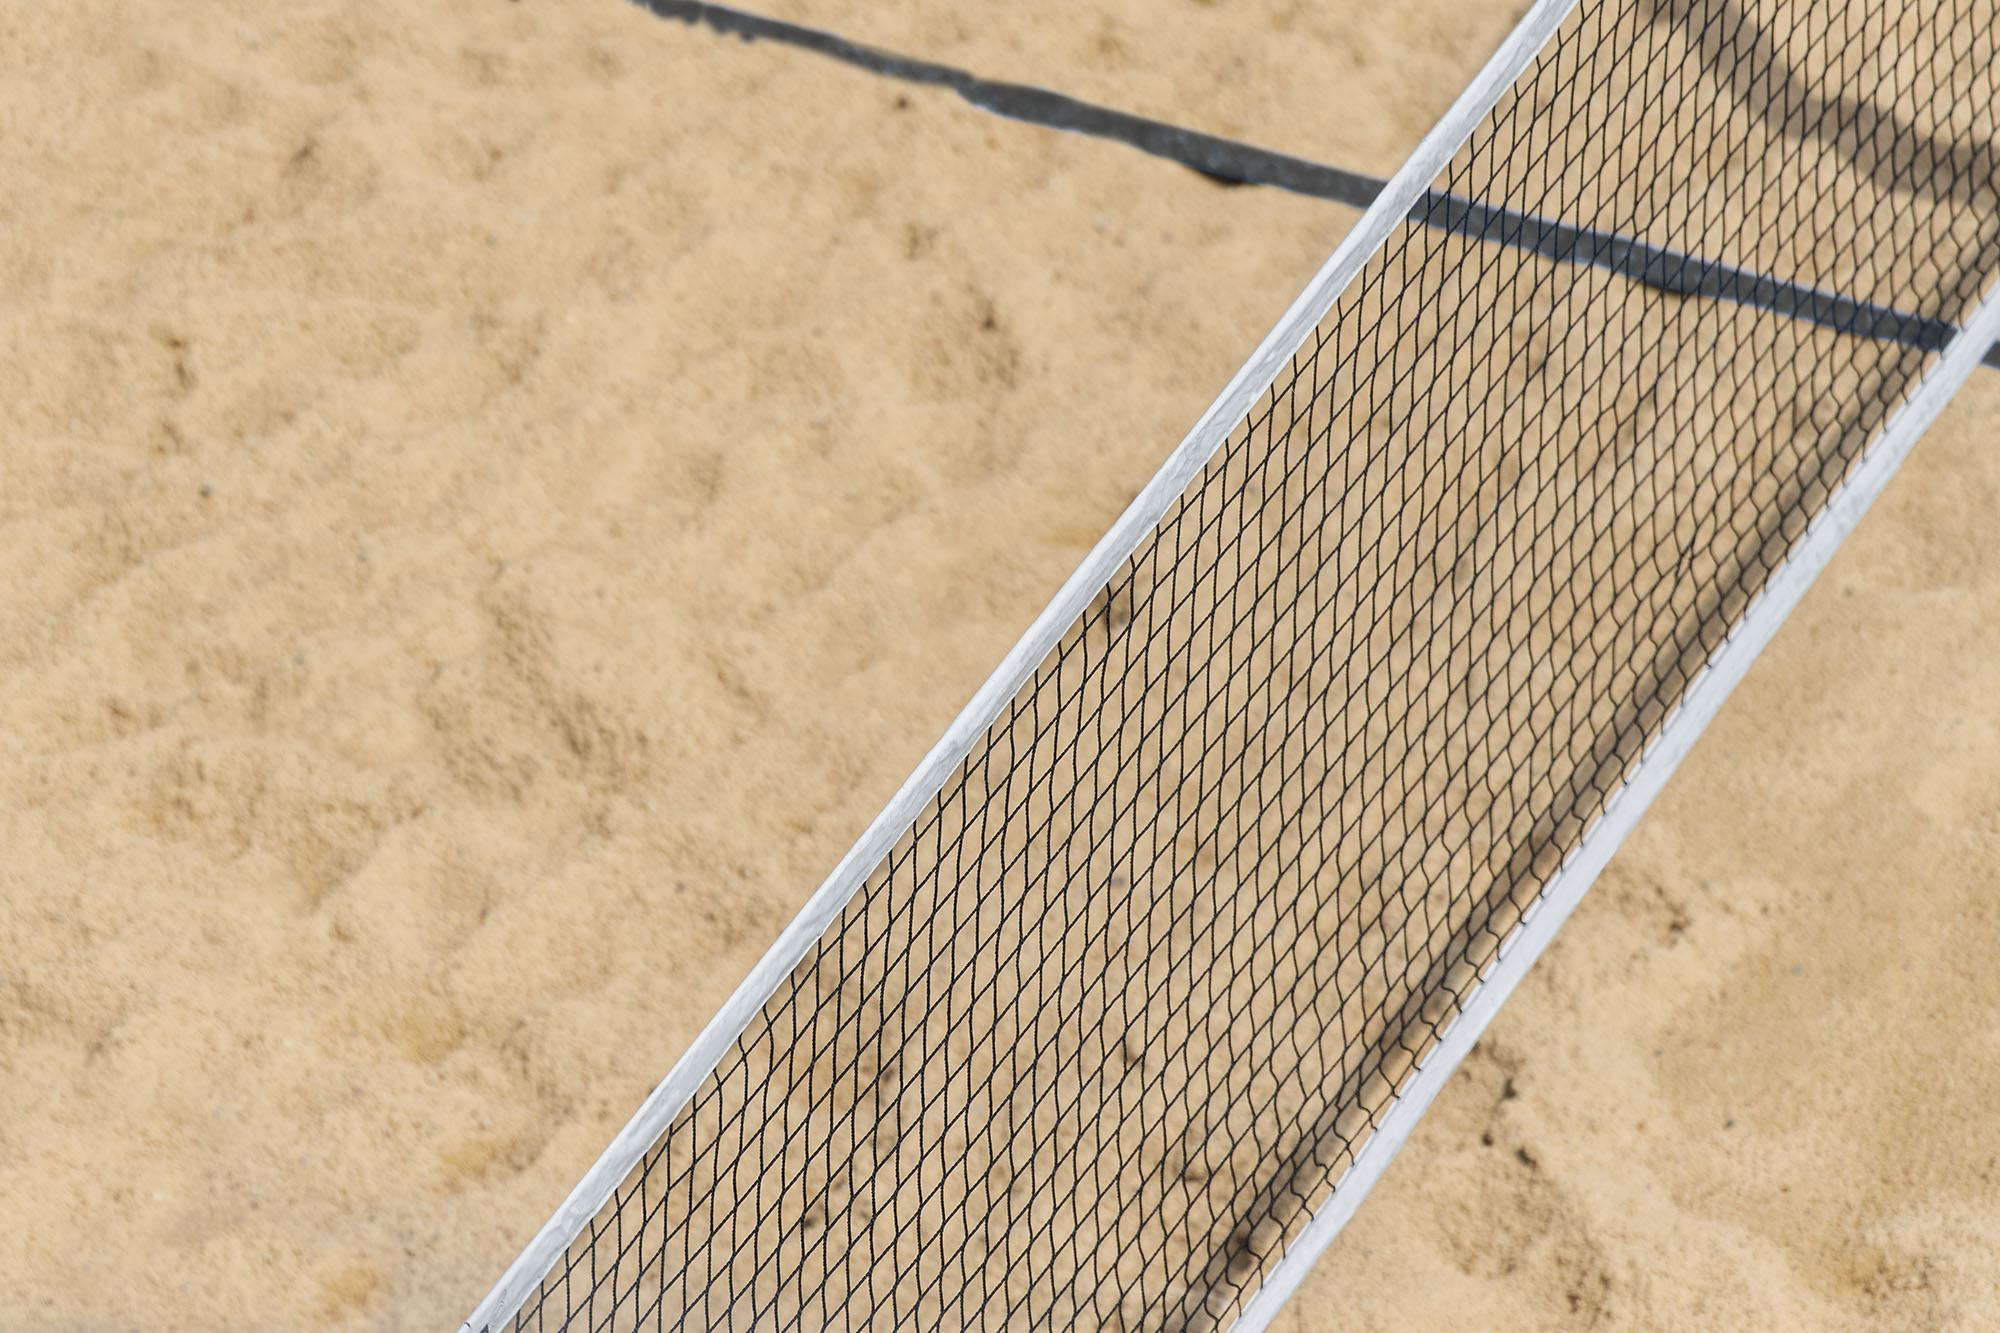 Beach volleyball and beach tennis net on the background of sand. Summer sport concept